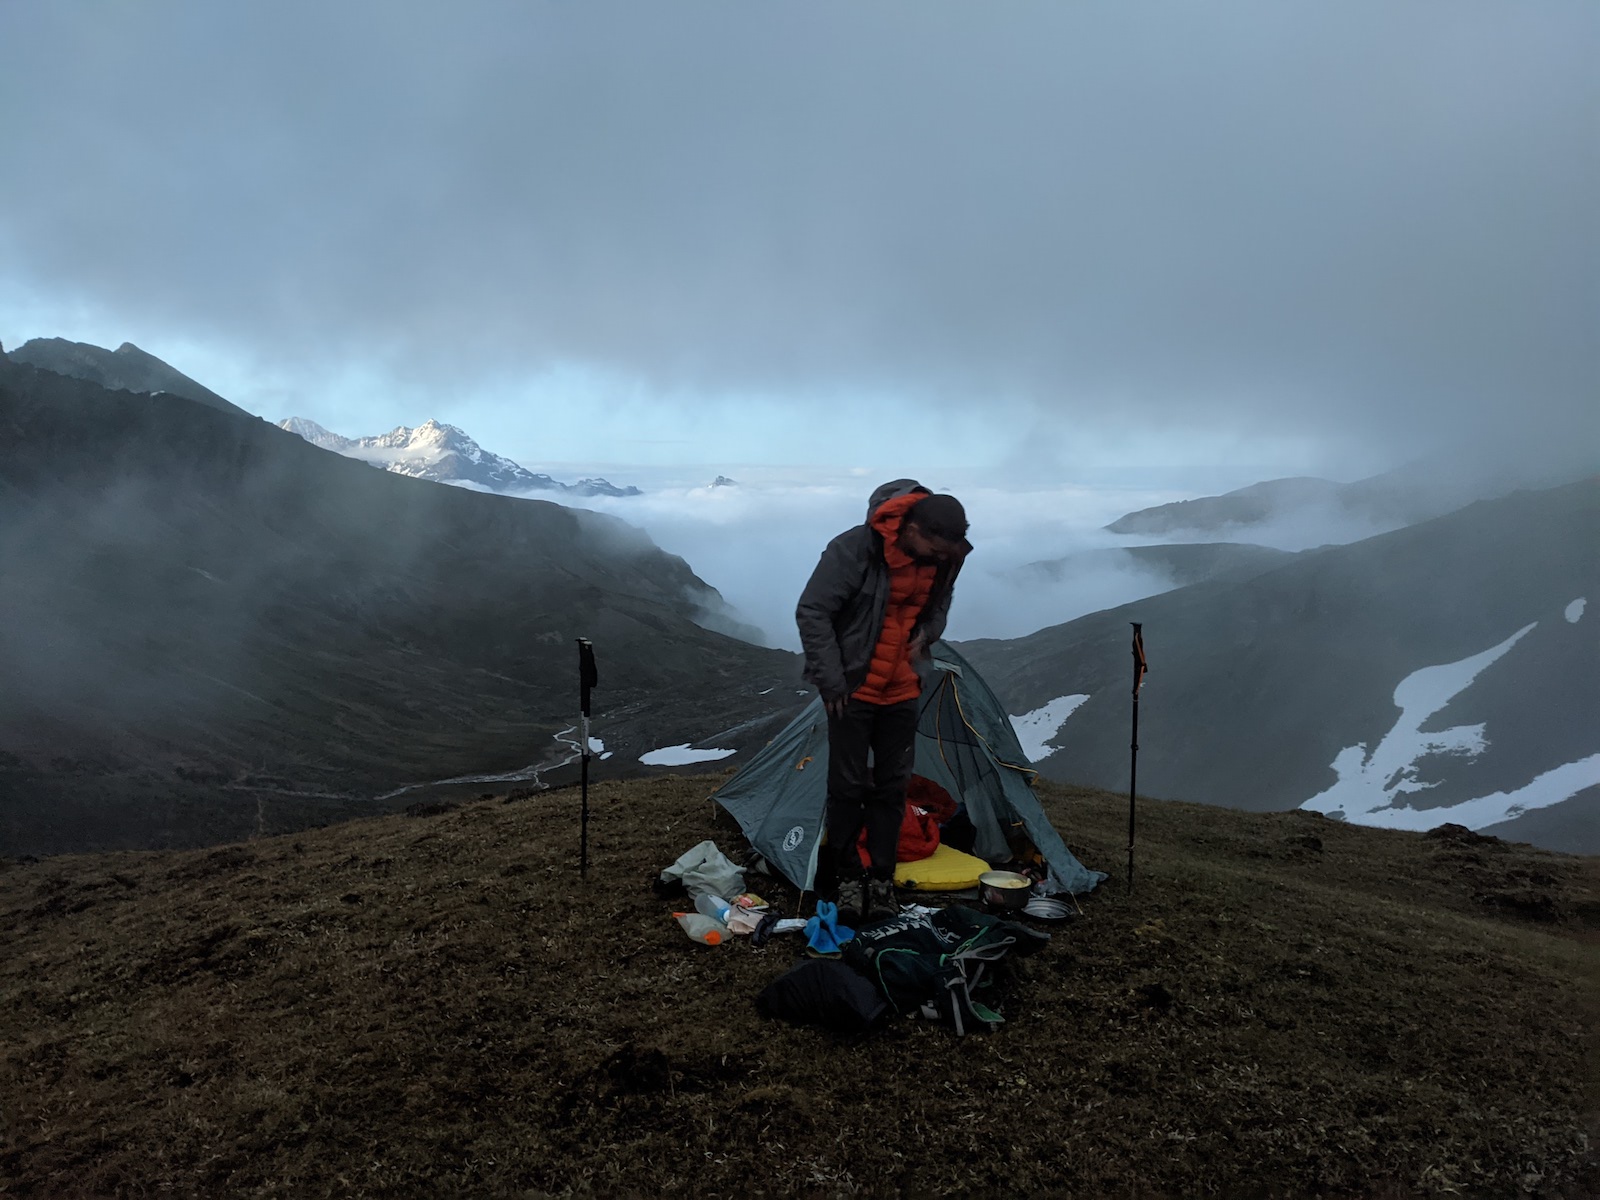 40-mile and 48-hour exploratory fastpacking trip with my friend, Erick, in the Bhutanese Himalayas. Here we camped at 15,000 feet and woke up to a blizzard.